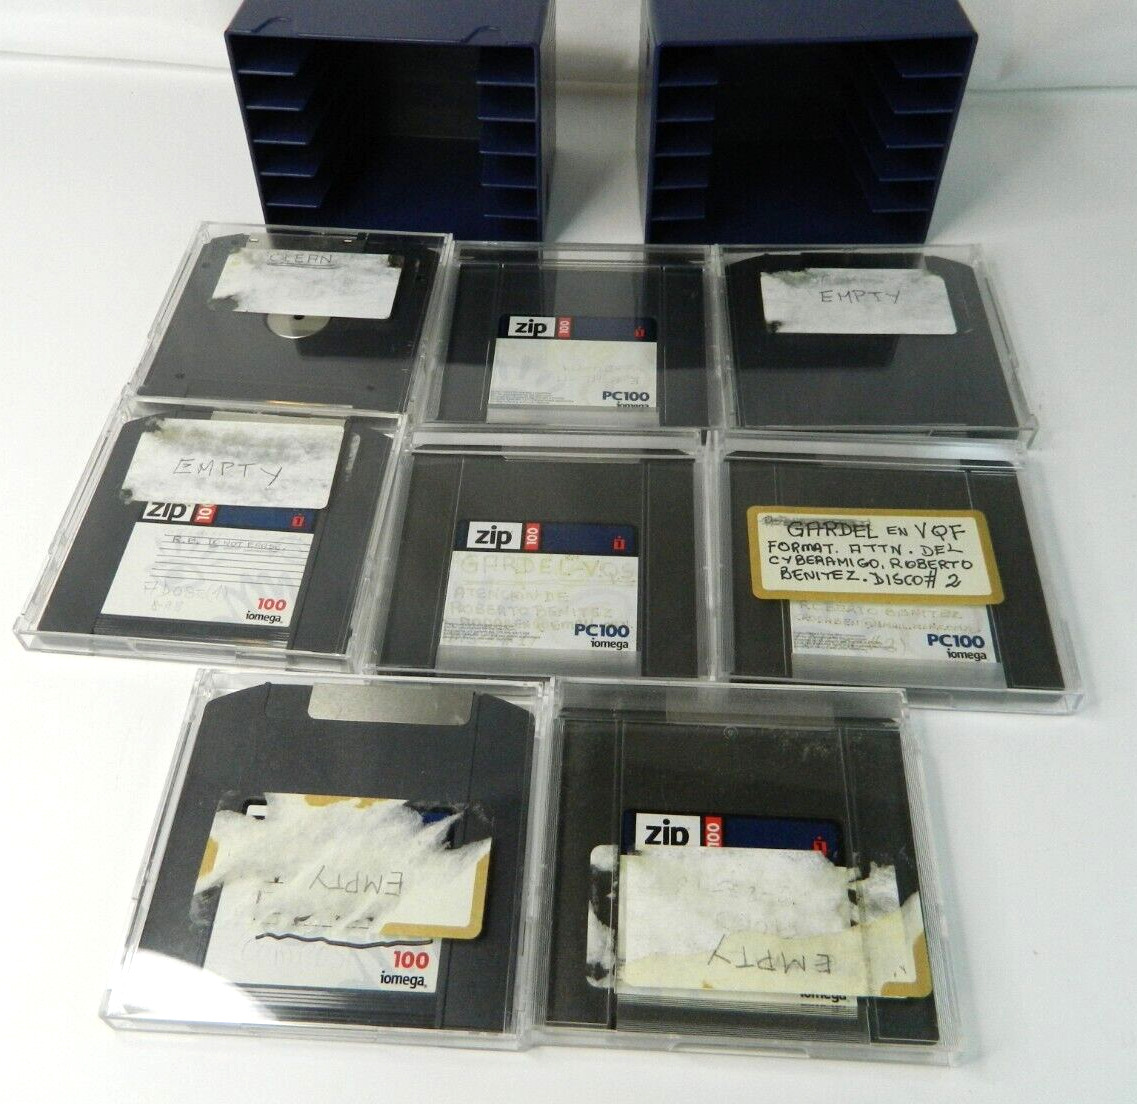 IOMEGA PC100 MB ZIP Lot of 8 DISKS IN JEWEL CASES WITH 2 IOMEGA STORAGE BOXES